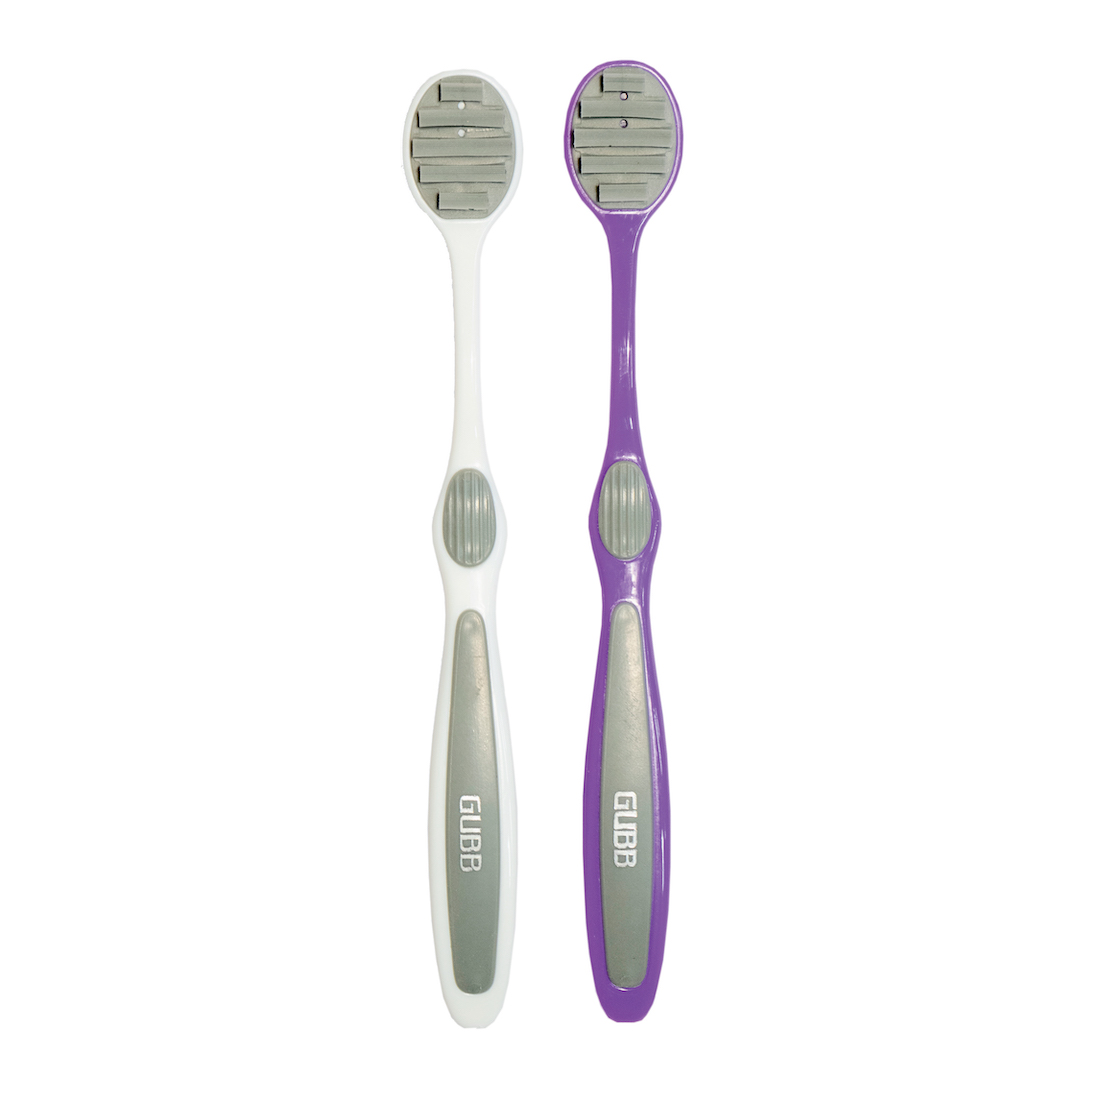 T+ Tongue Cleaner, Purple & Grey